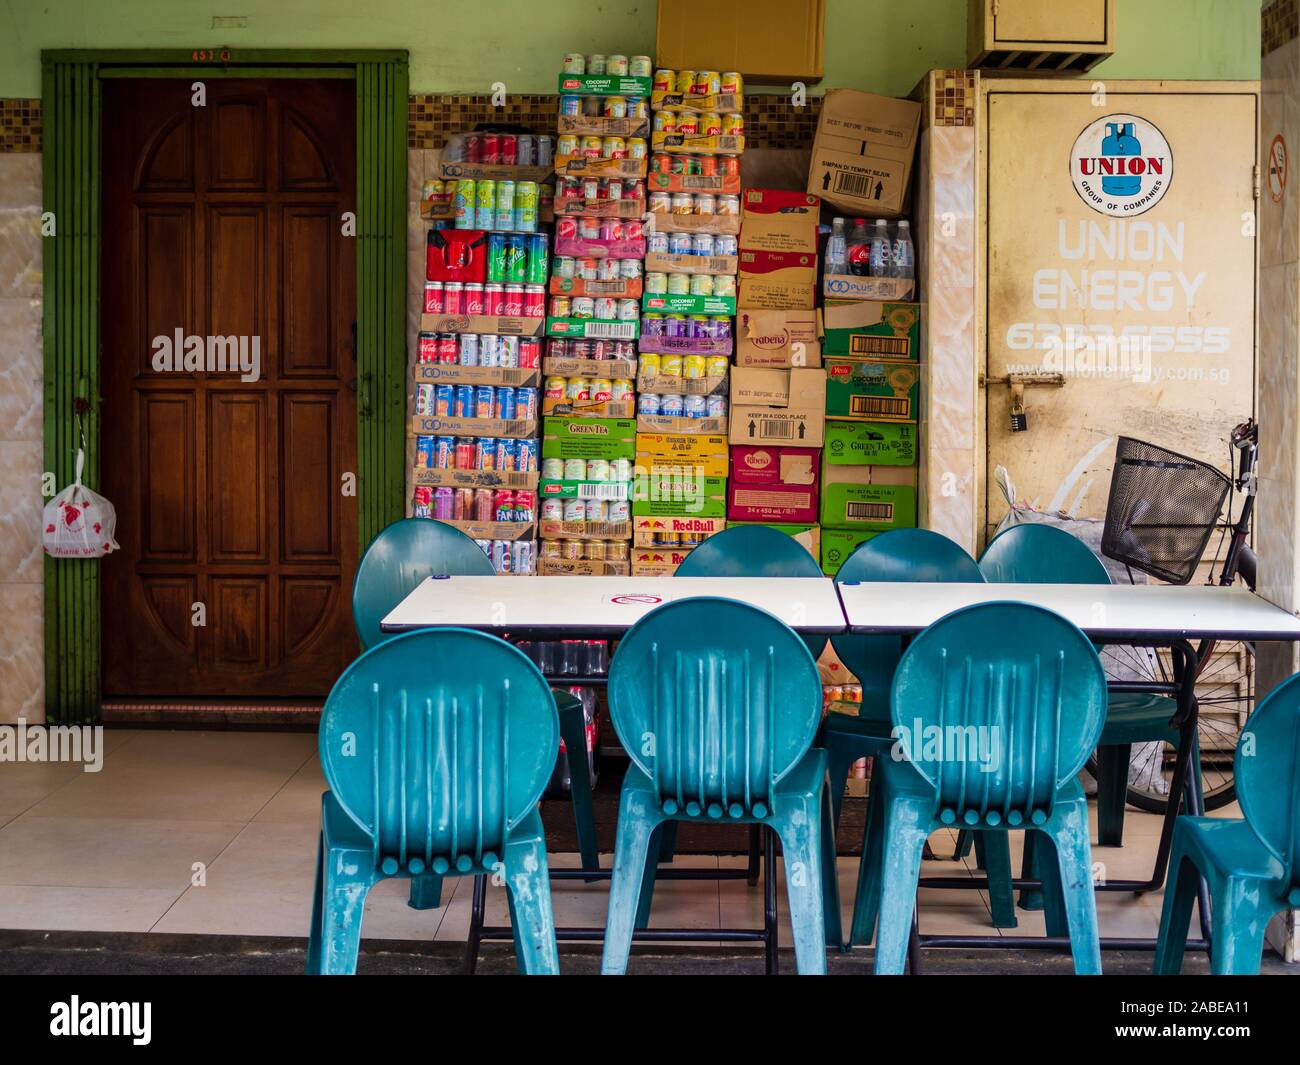 SINGAPORE – 9 MAY 2019 – Empty tables and chairs and boxes of canned drinks at a traditional coffeeshop / kopitiam / casual eatery in Singapore. These Stock Photo